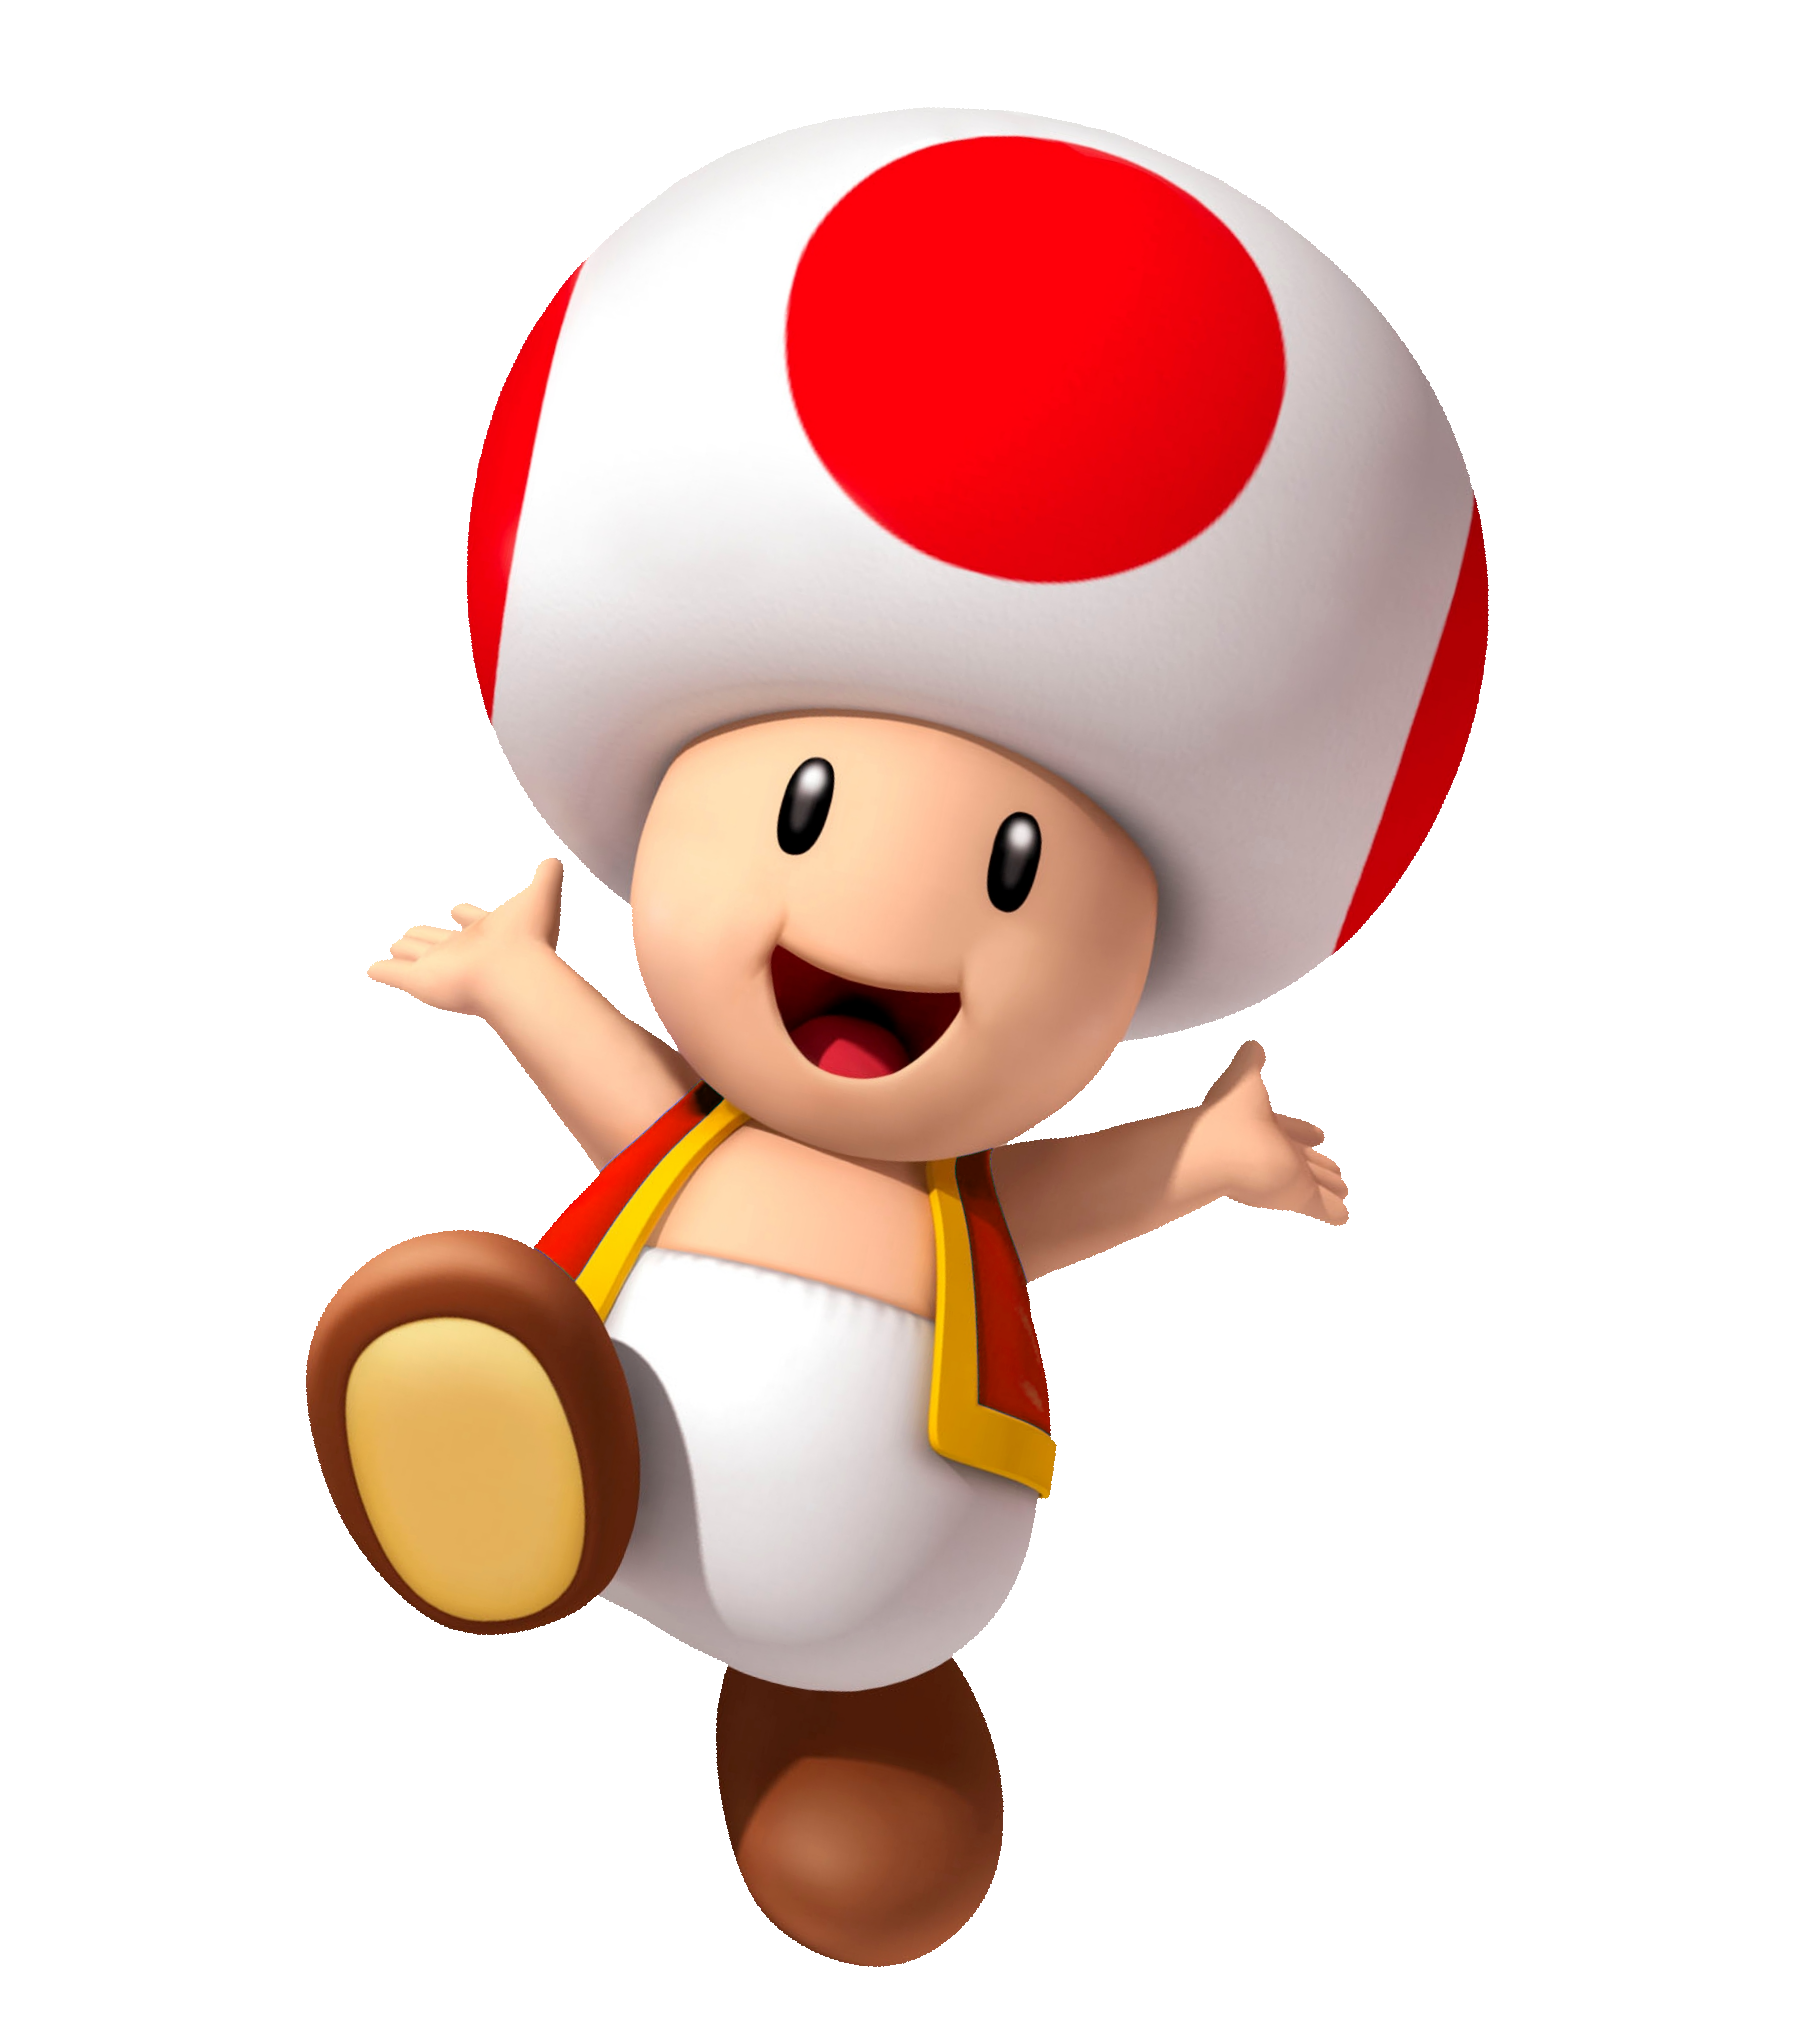 toad nintendo switch download